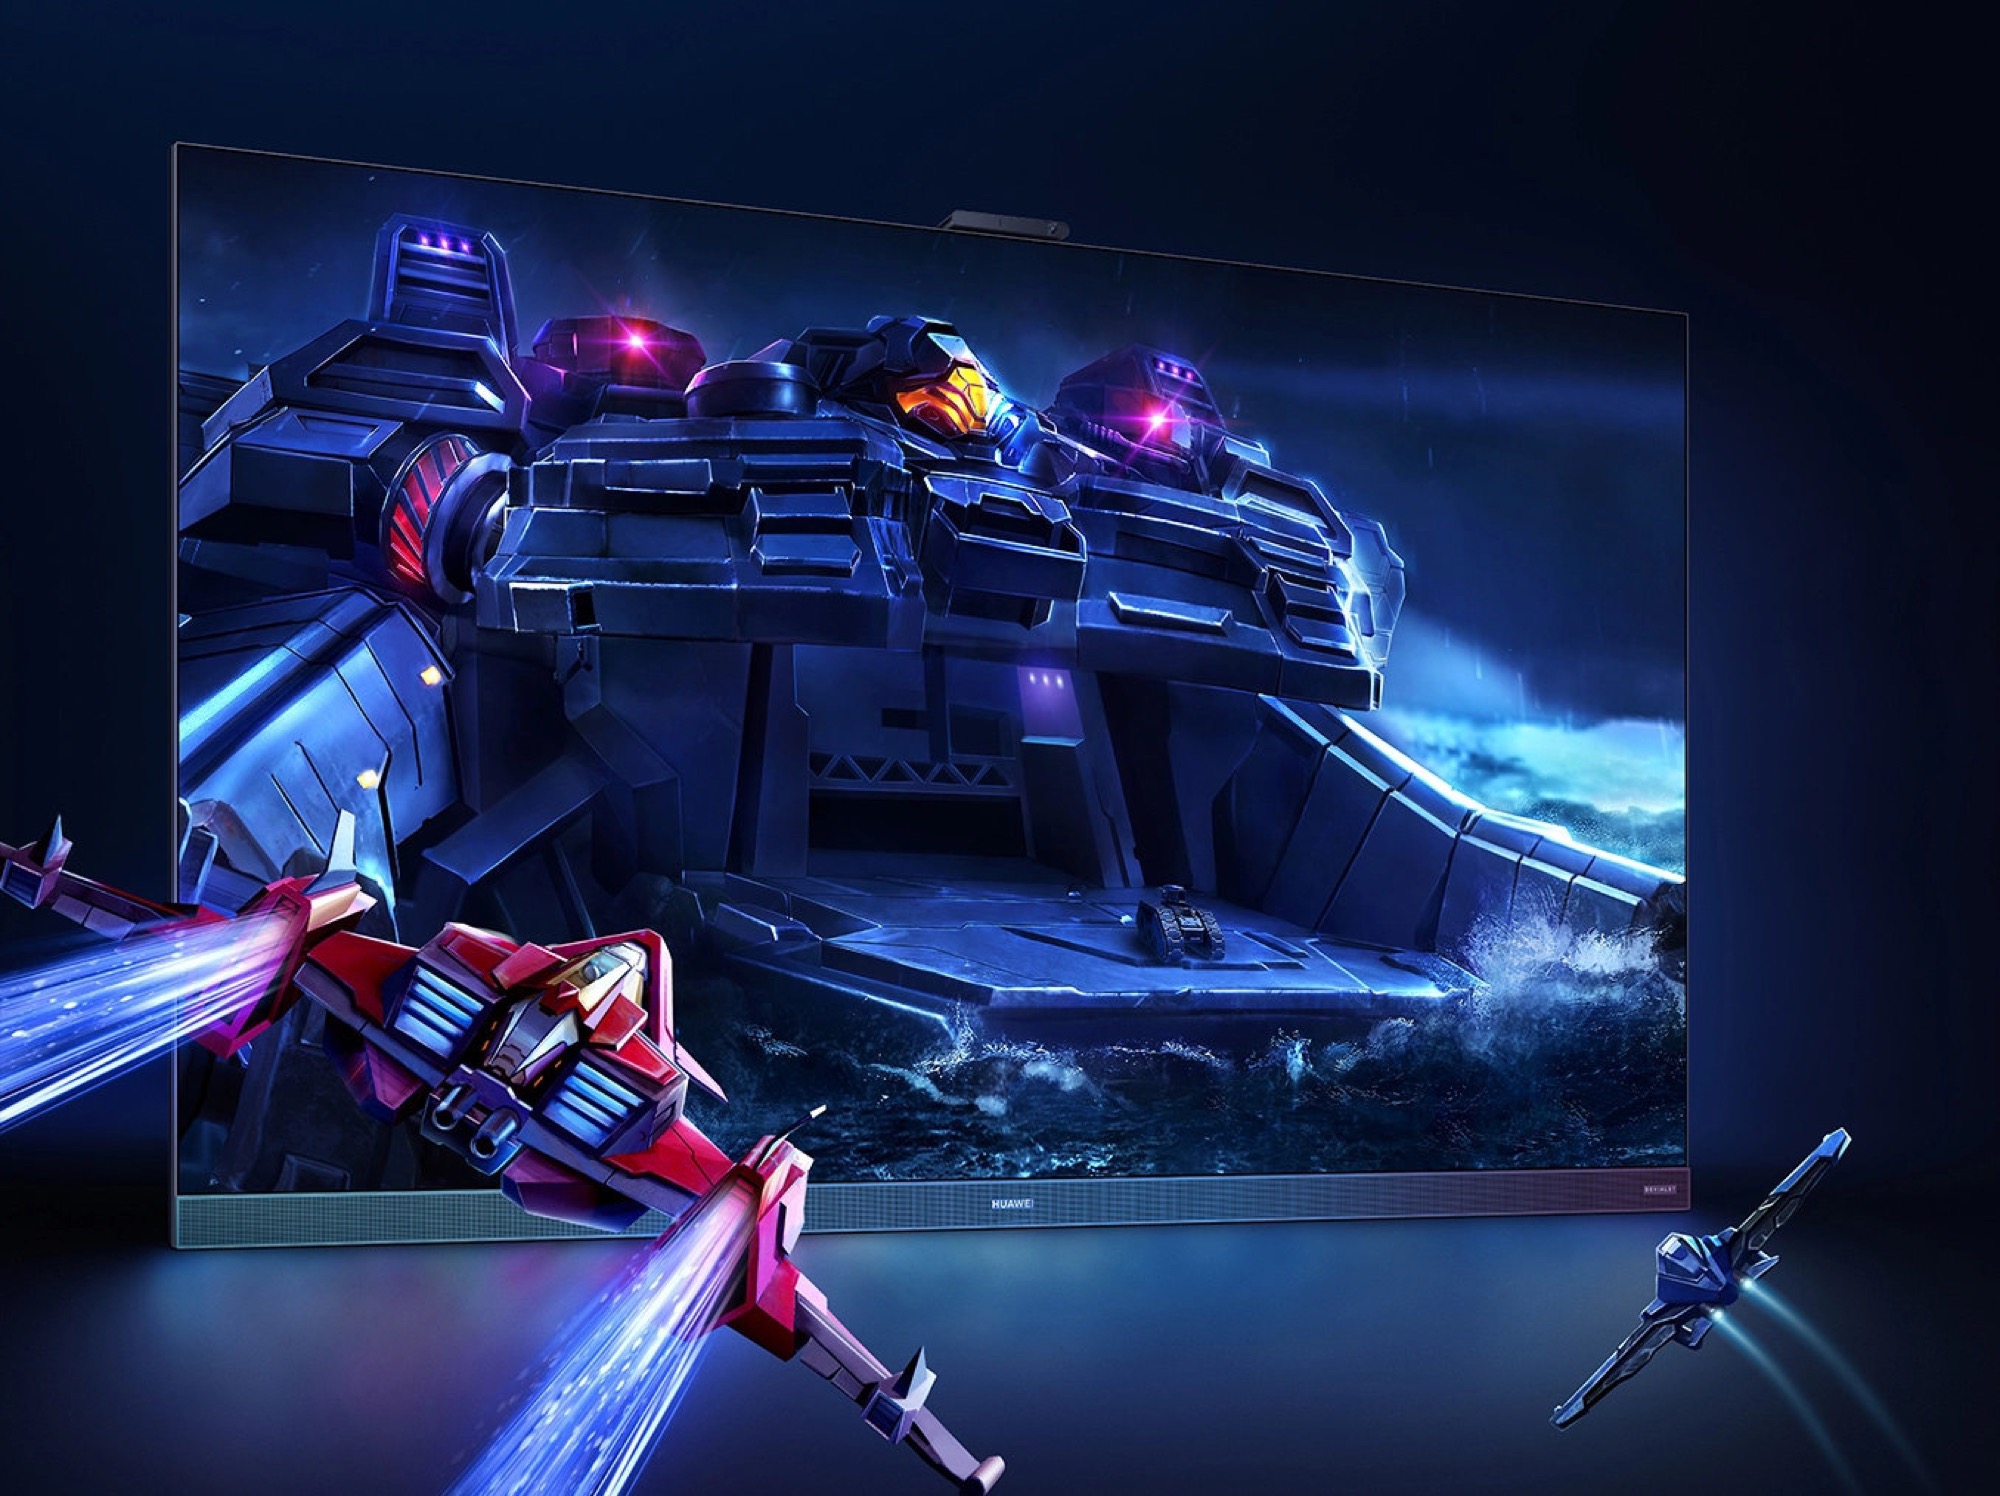 Huawei unveils Vision Smart Screen Z65 gaming edition with 50W deviate sound system, HDMI 2.1 and 120Hz